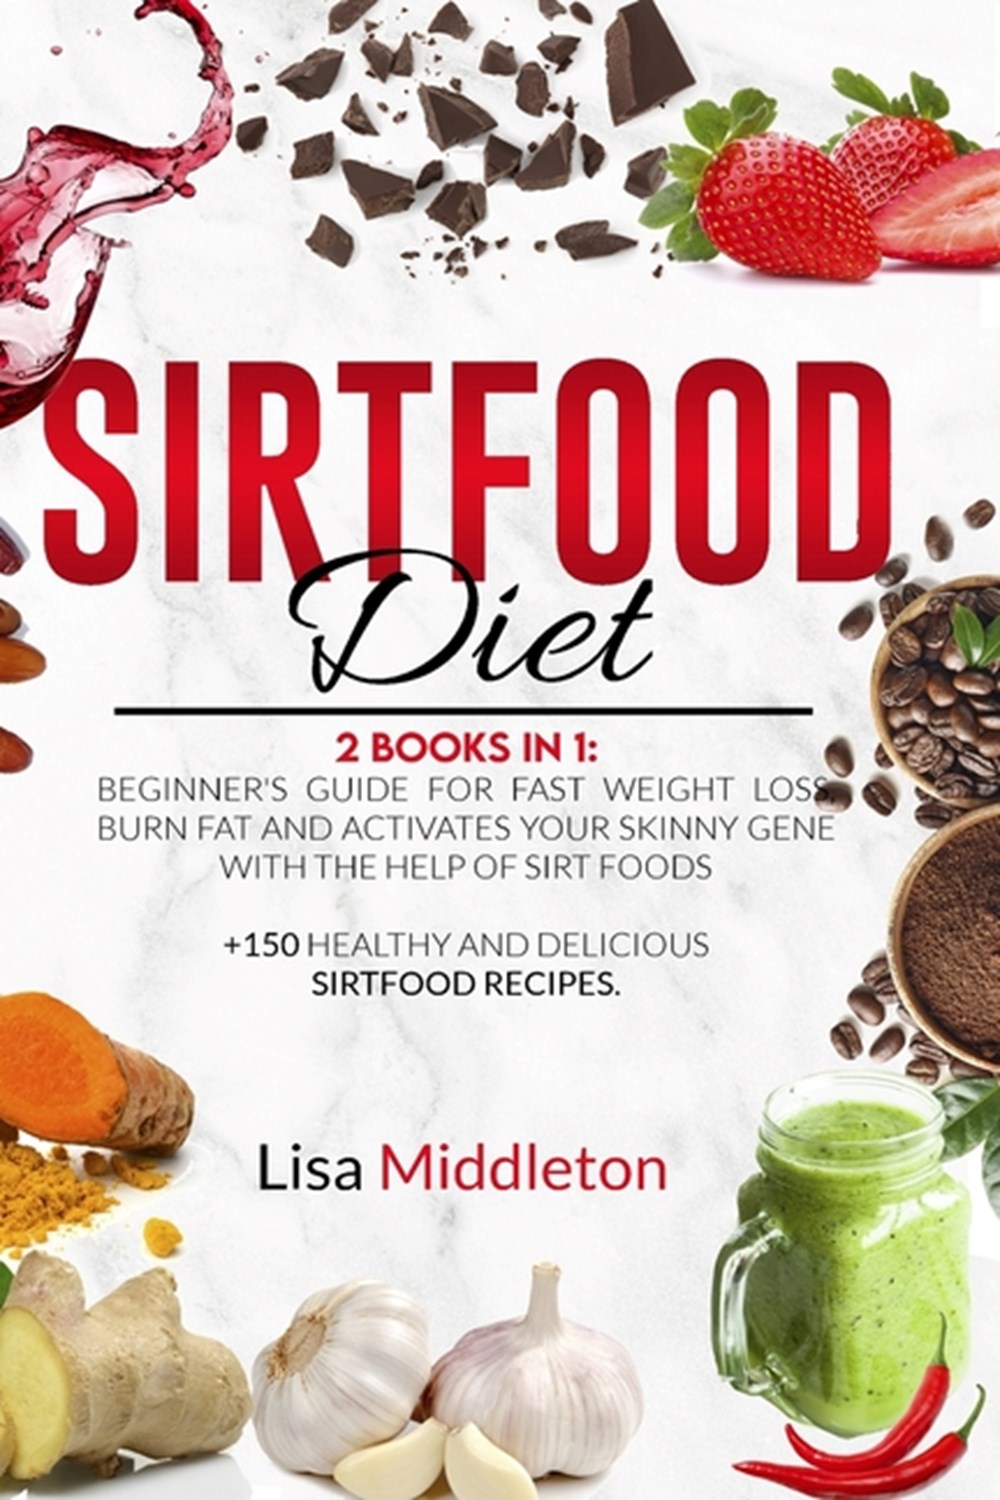 8 SirtFood Diet Recipes and Ideas - diet recipes, diet, recipes